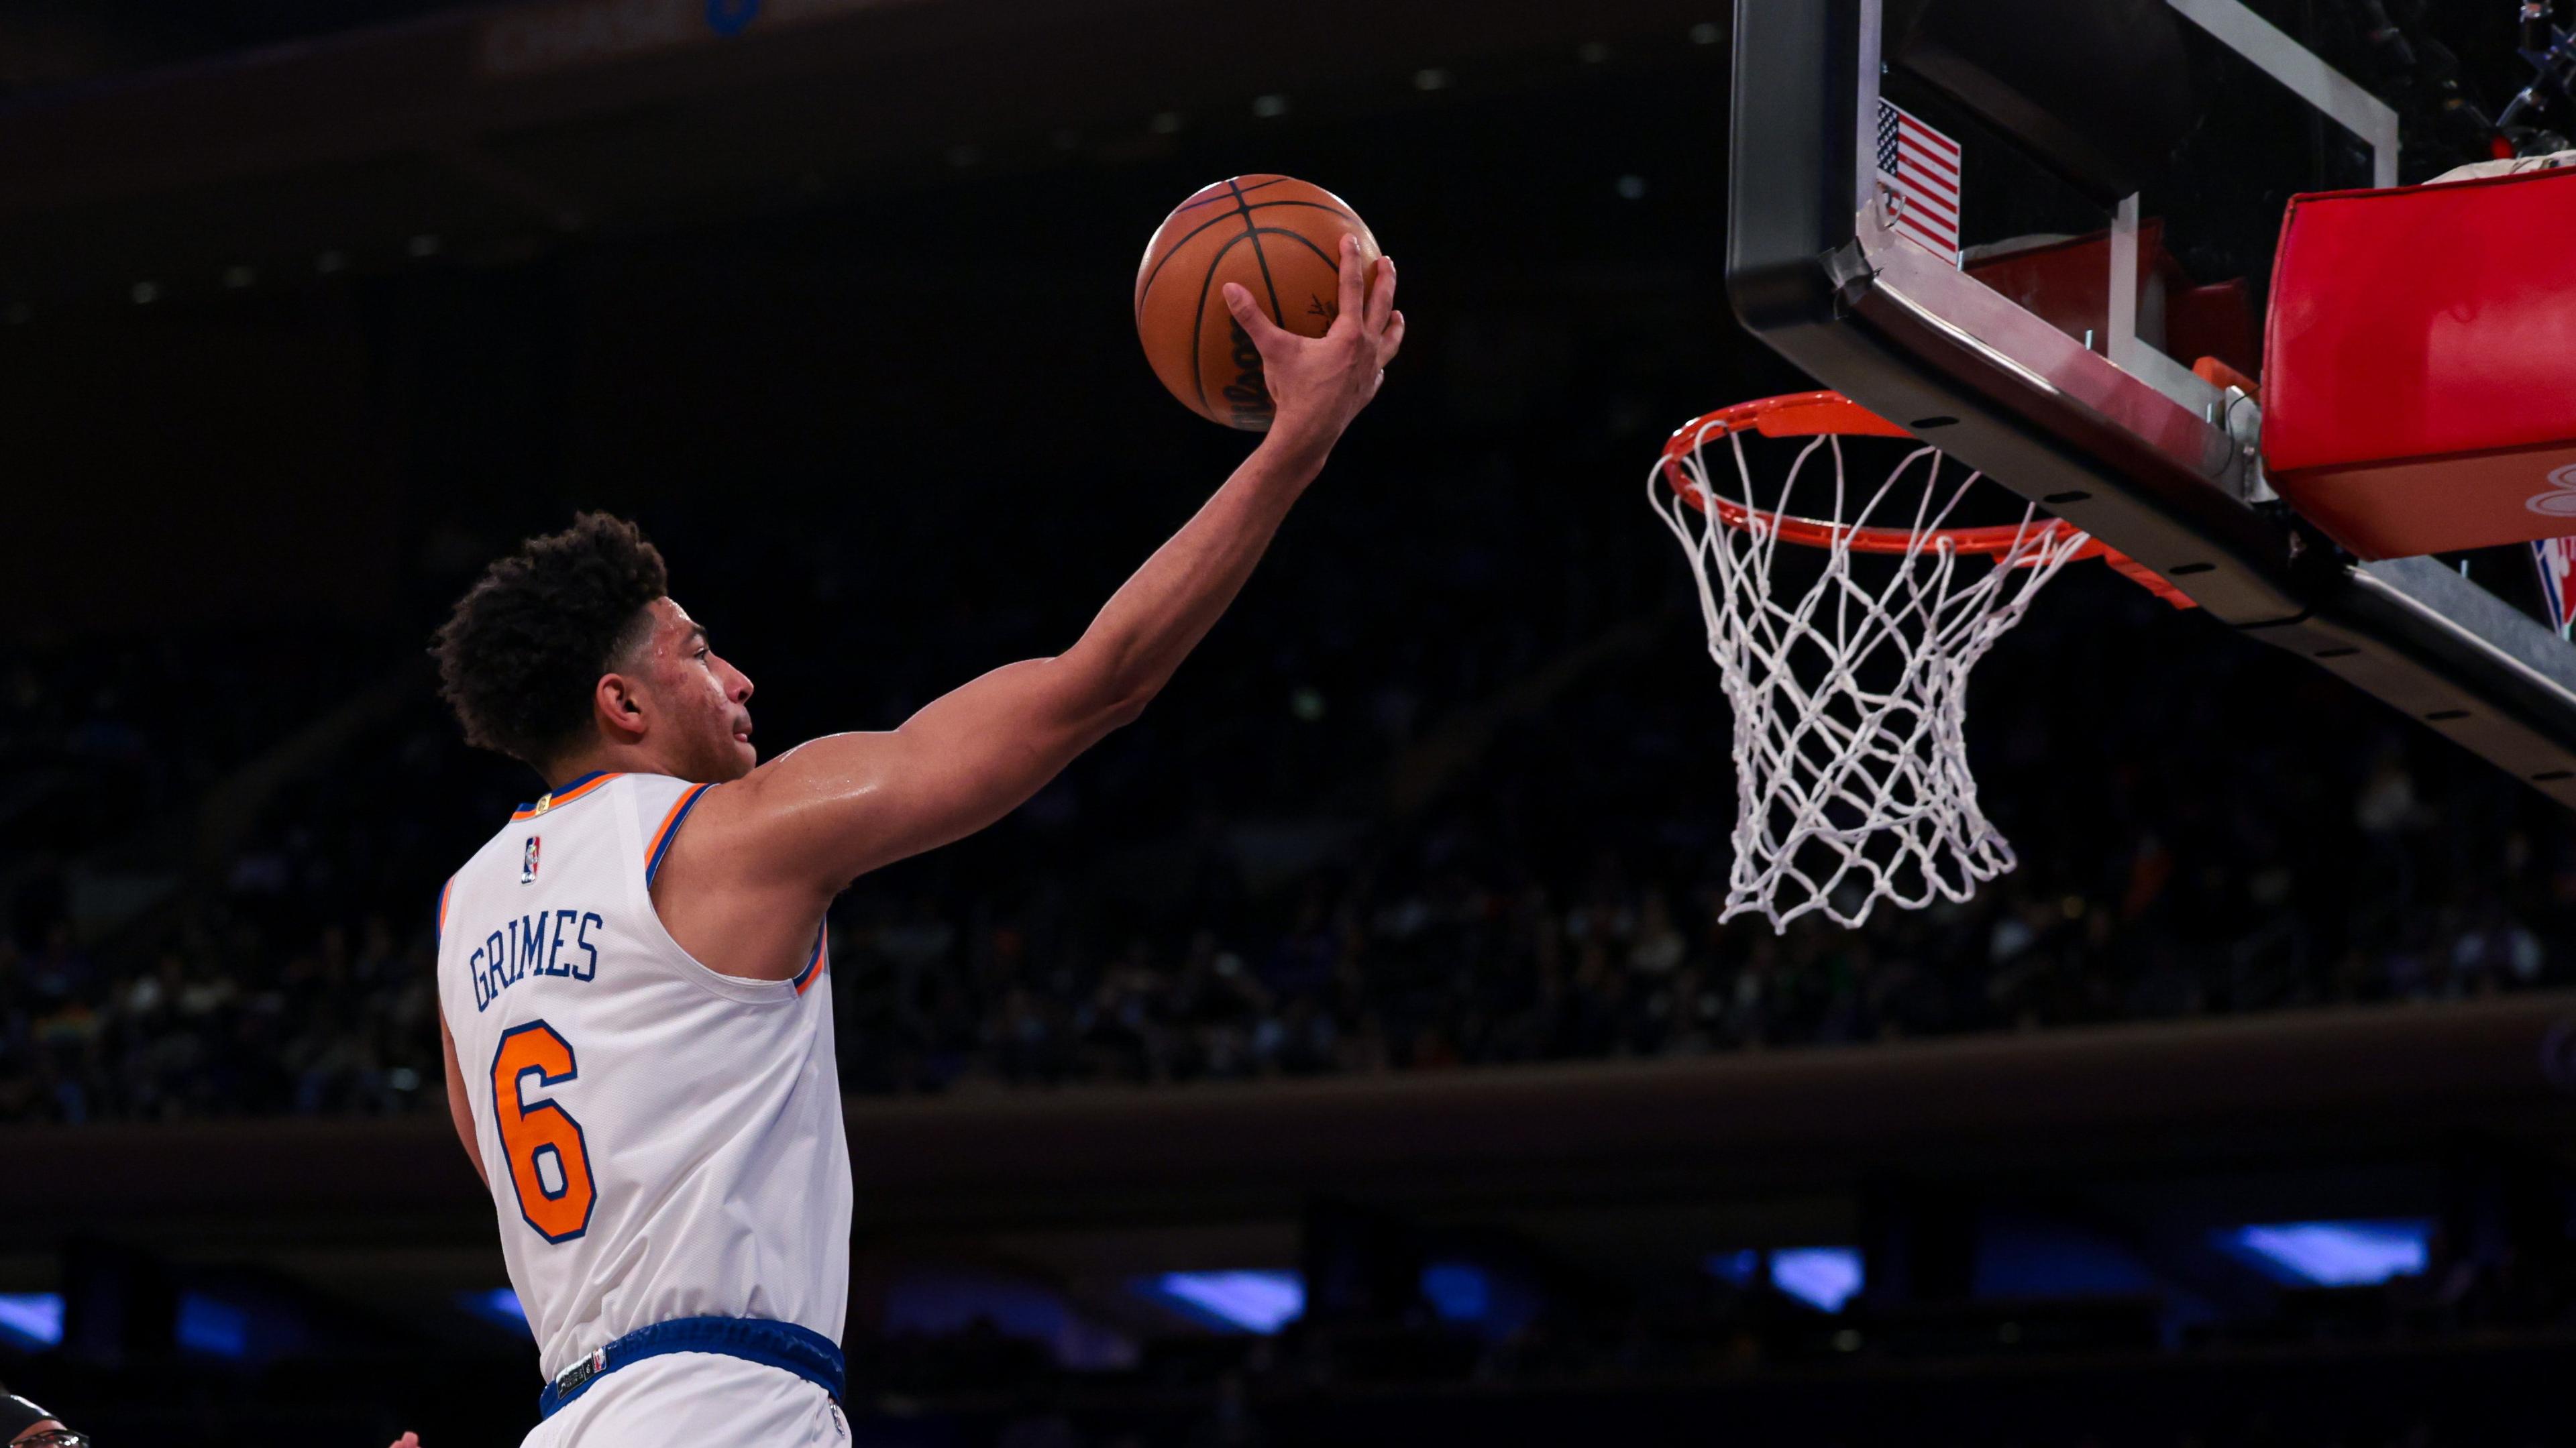 Jan 31, 2022; New York, New York, USA; New York Knicks guard Quentin Grimes (6) shoots the ball as Sacramento Kings center Richaun Holmes (22) and forward Harrison Barnes (40) defend during the second half at Madison Square Garden. Mandatory Credit: Vincent Carchietta-USA TODAY Sports / Vincent Carchietta-USA TODAY Sports